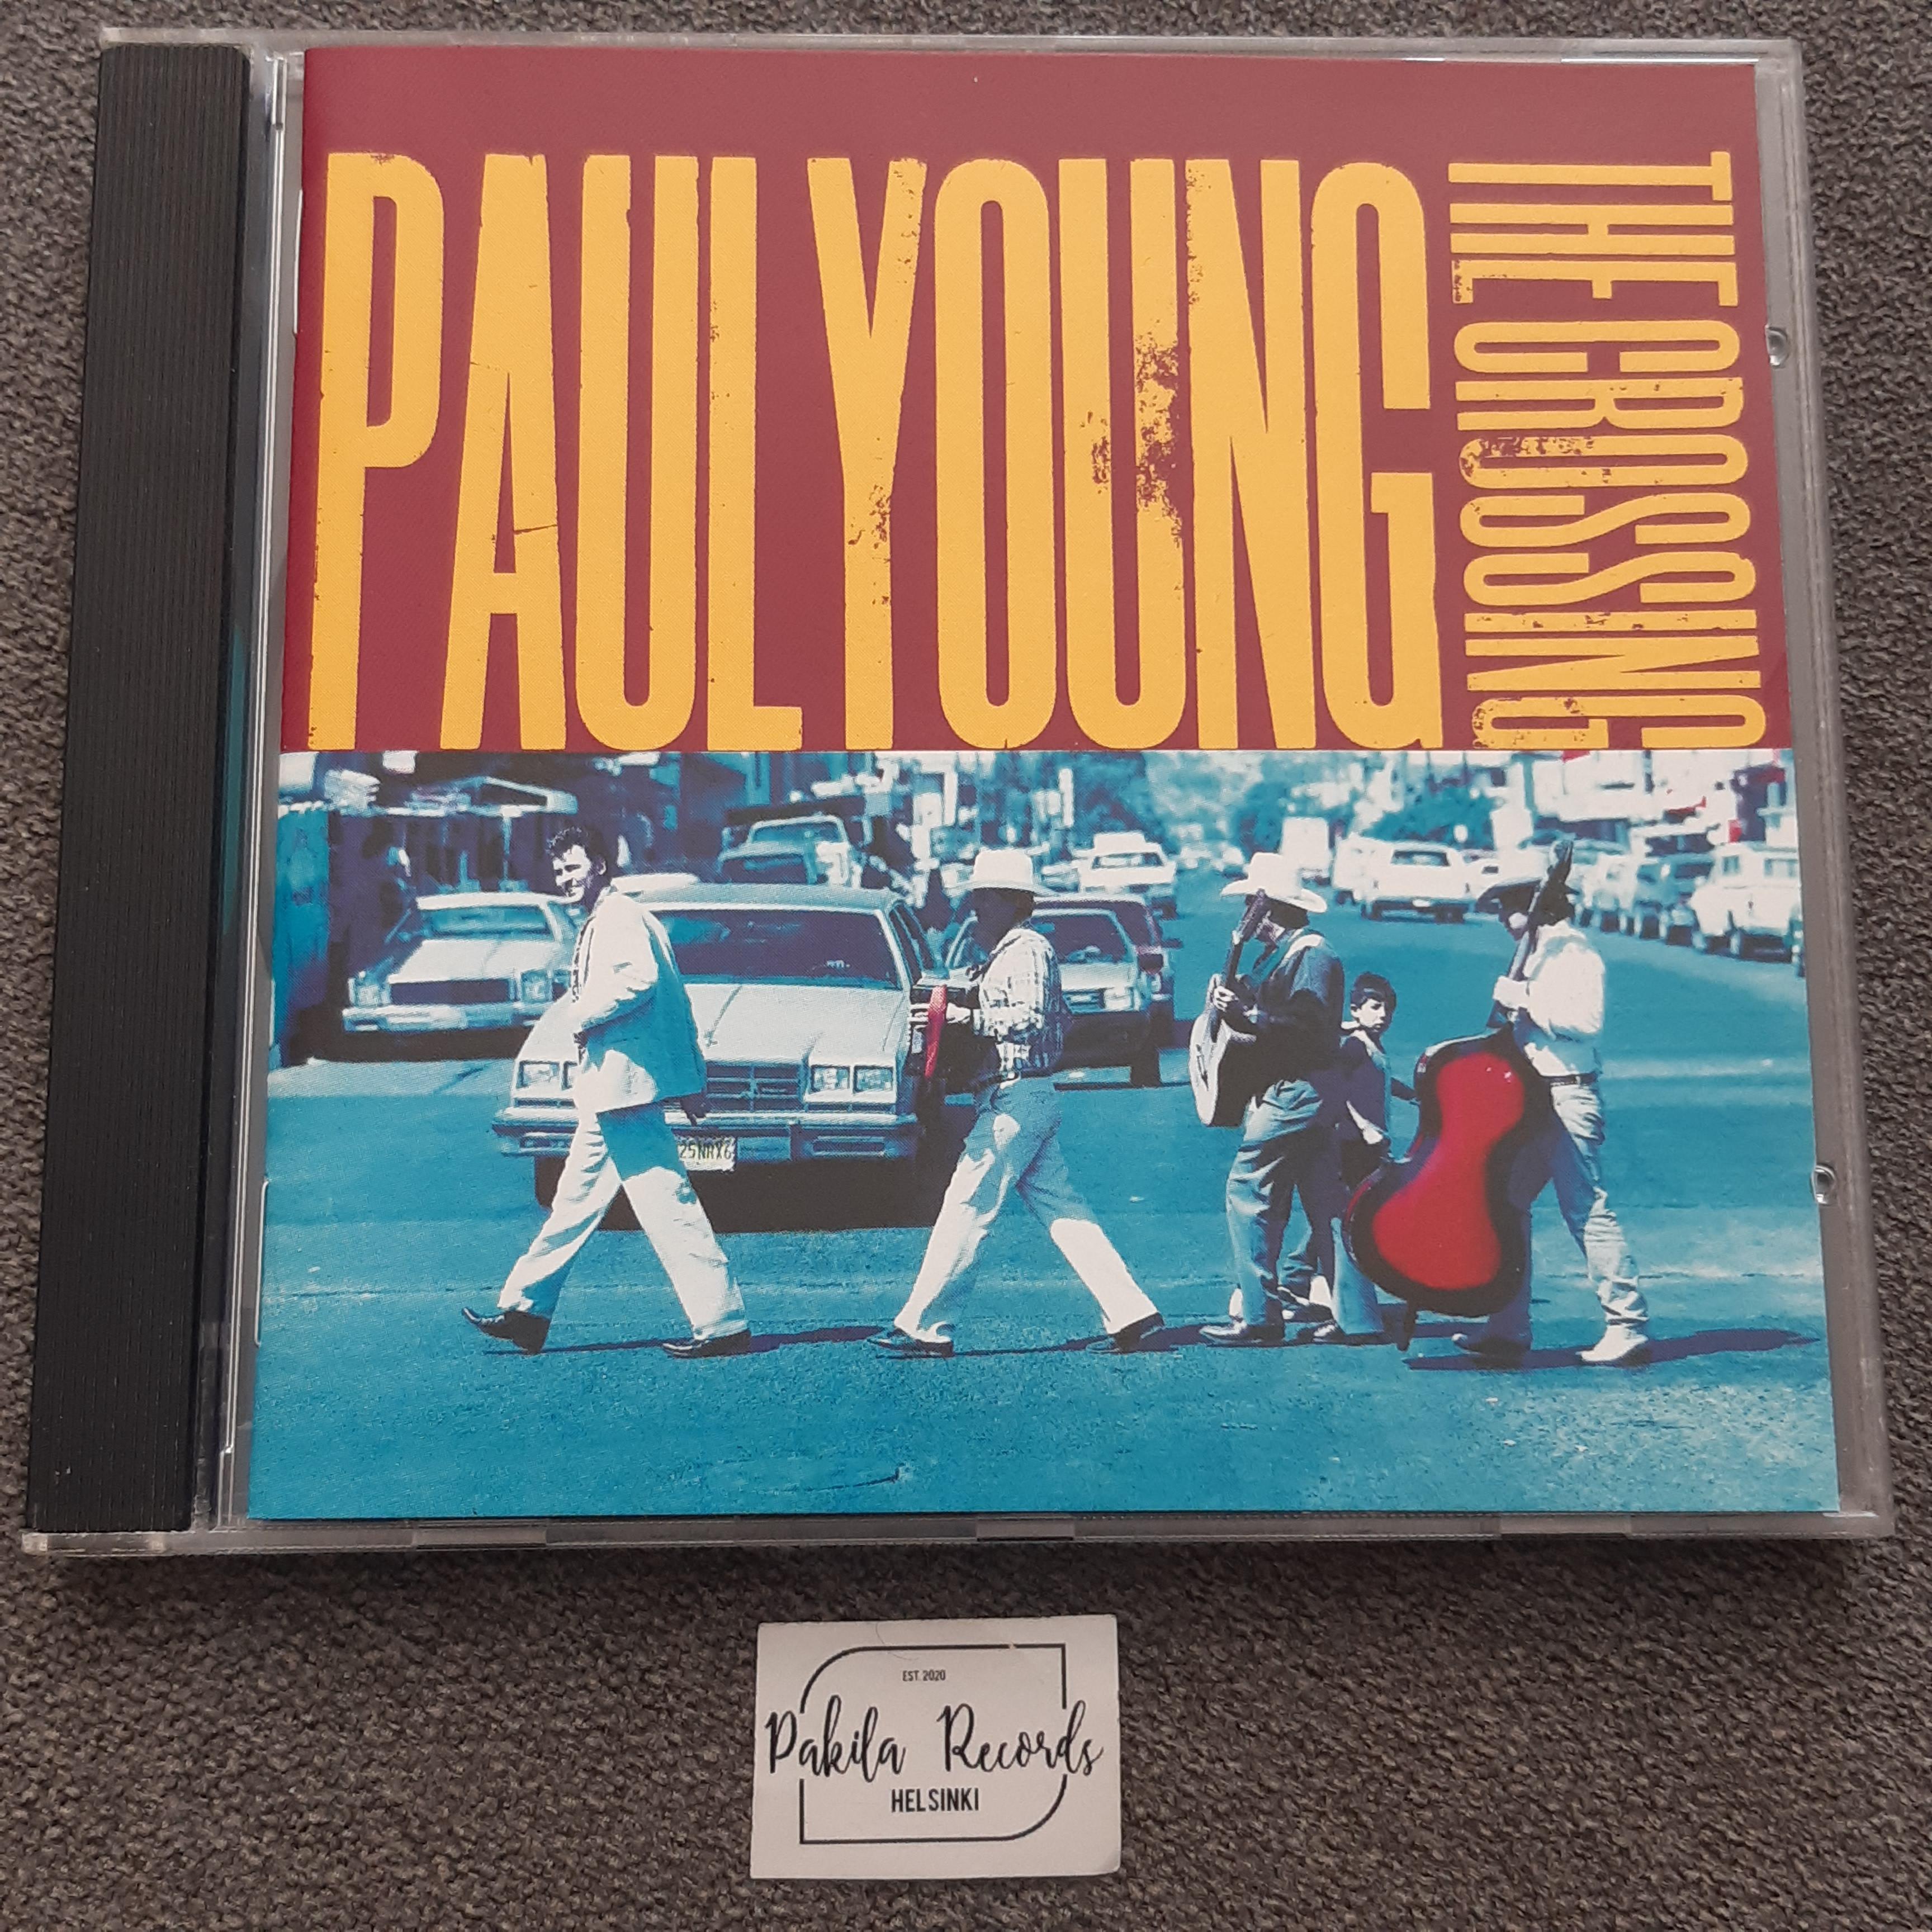 Paul Young - The Crossing - CD (käytetty)